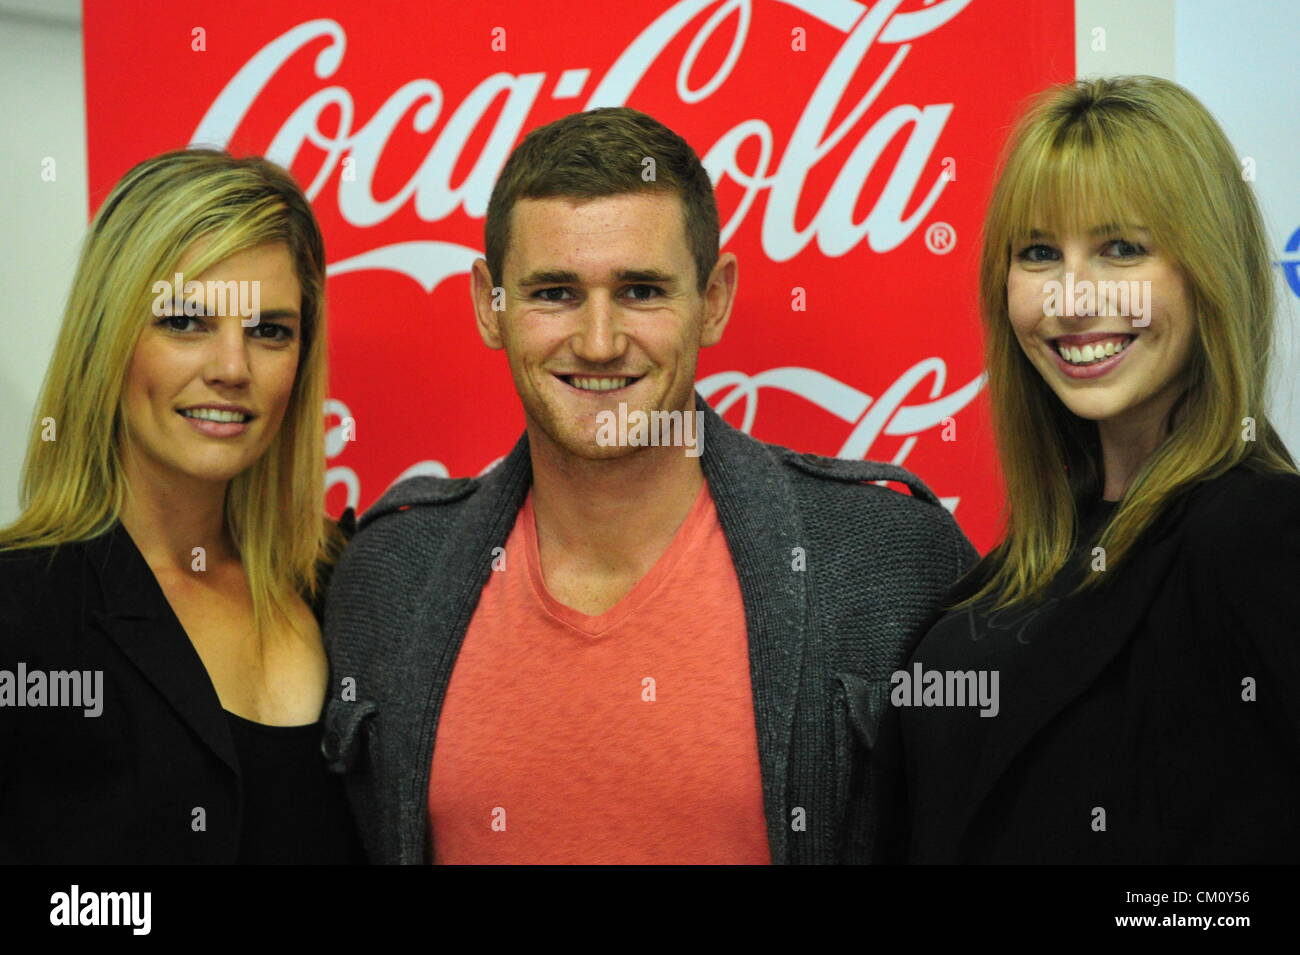 PORT ELIZABETH, SOUTH AFRICA: Olympic gold medalist Cameron van der Burgh with Tanya Hyman (L) and Jolene van Ree (R) on September 10, 2012 in Port Elizabeth, South Africa. (Photo by Gallo Images / Foto24 / Deon Ferreira) Stock Photo